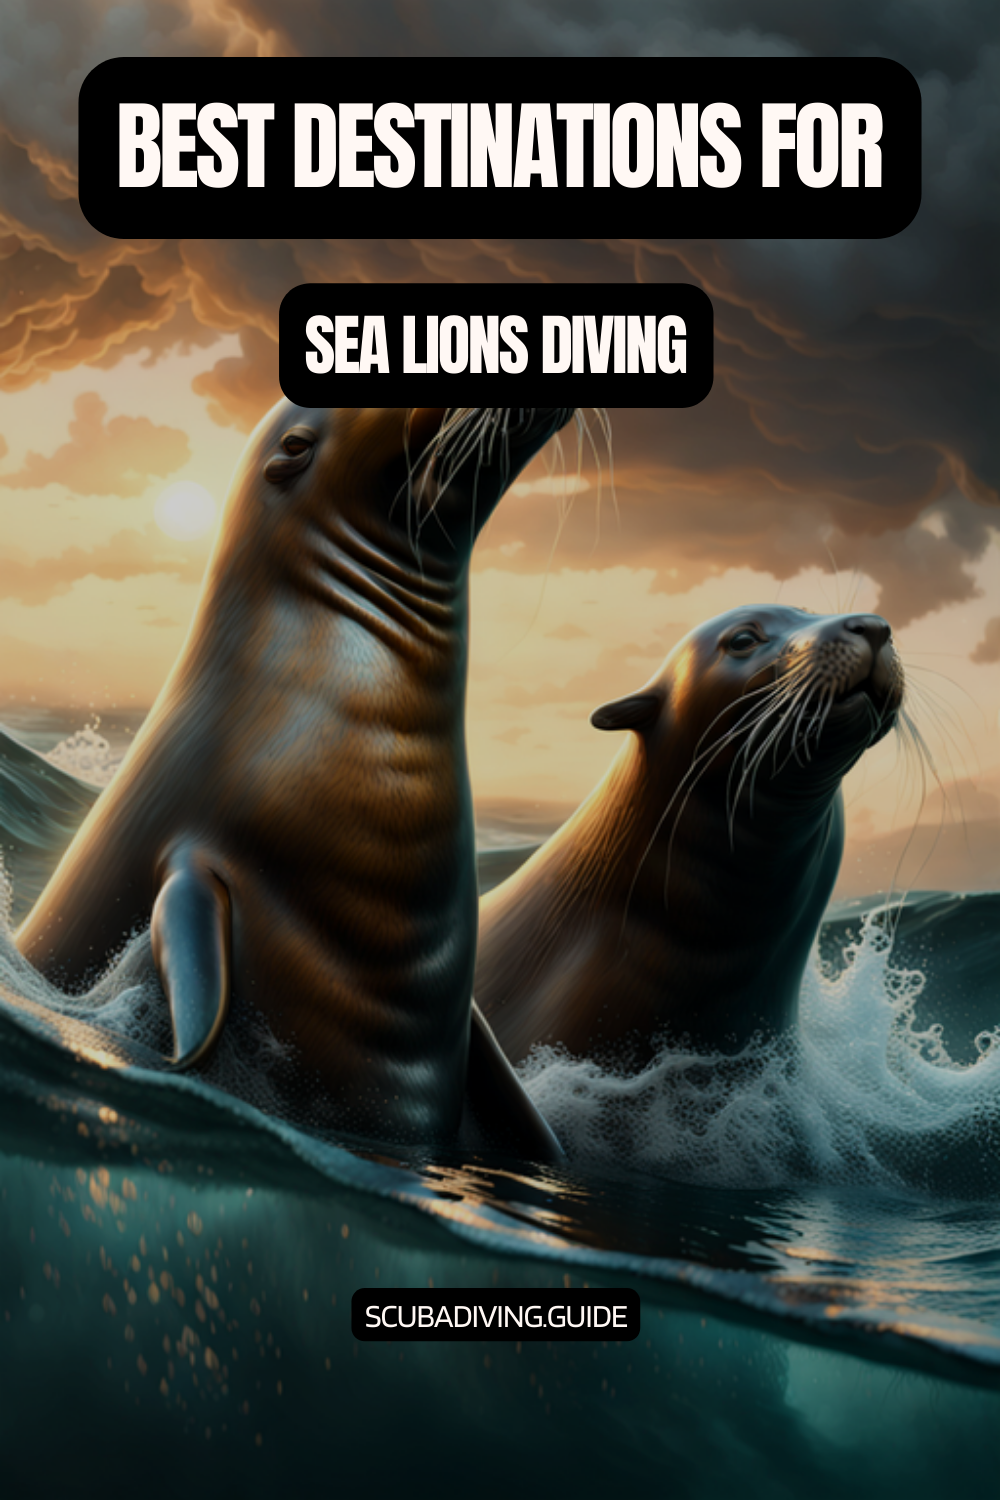 Best Destinations for Diving with Sea Lions